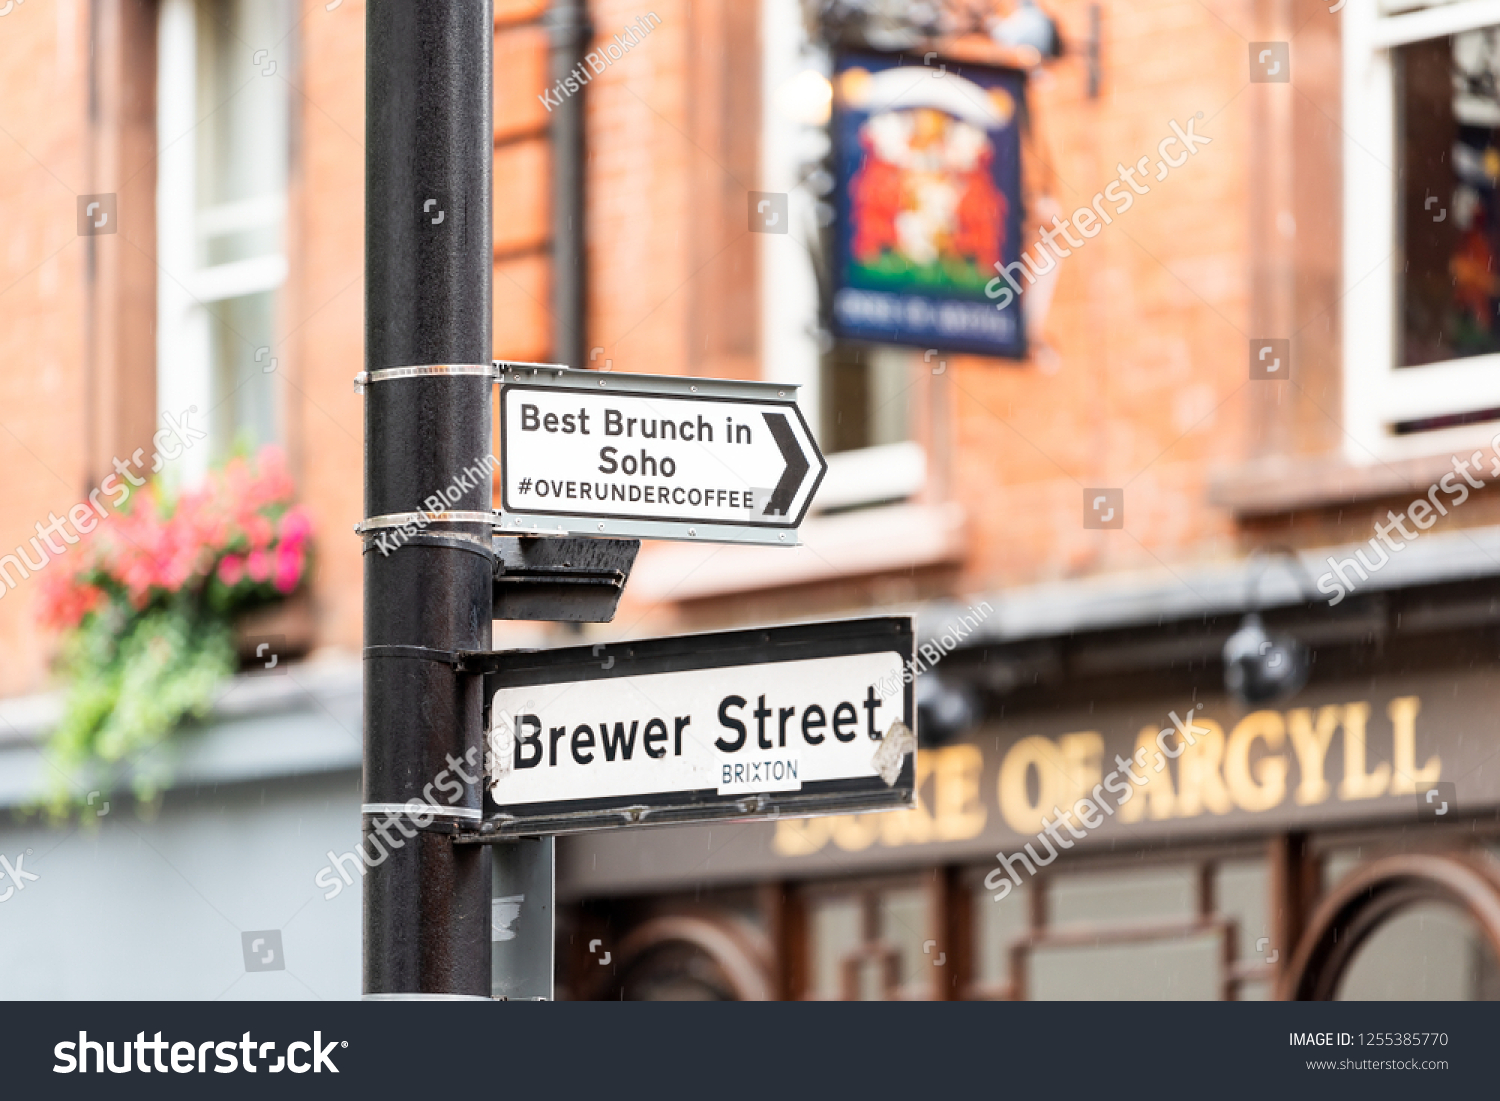 London, UK - September 12, 2018: Closeup of famous Brewer Market Street sign with best brunch in Soho overundercoffee hashtag, brixton, and pub called duke of argyll, nobody #1255385770